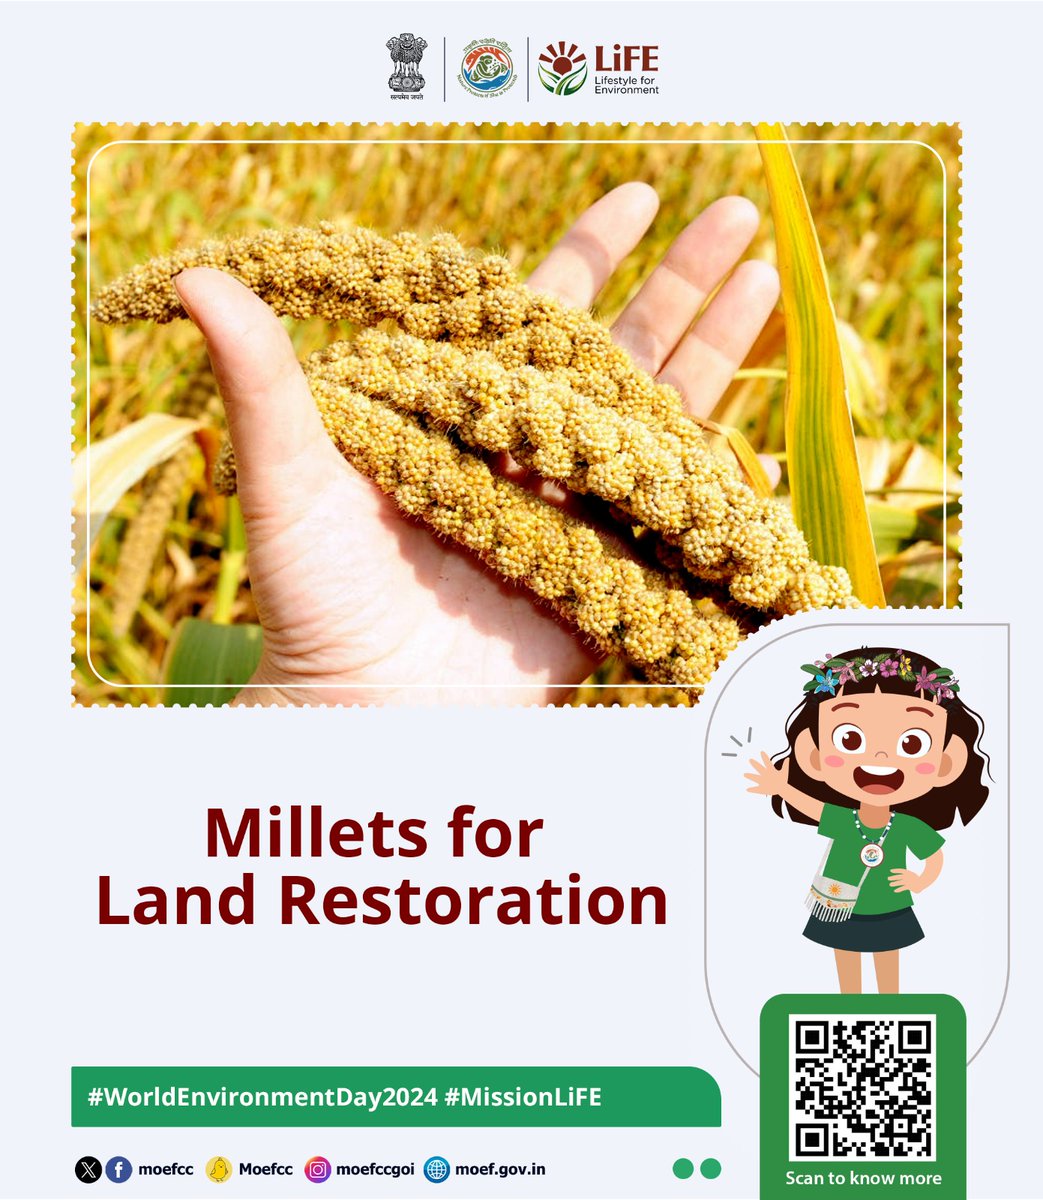 This World Environment Day, let's restore our lands with millets. These resilient crops enrich soil health, reduce erosion, support biodiversity and promote sustainable farming. #MissionLife #WED2024 @SCRailwayIndia @RailMinIndia